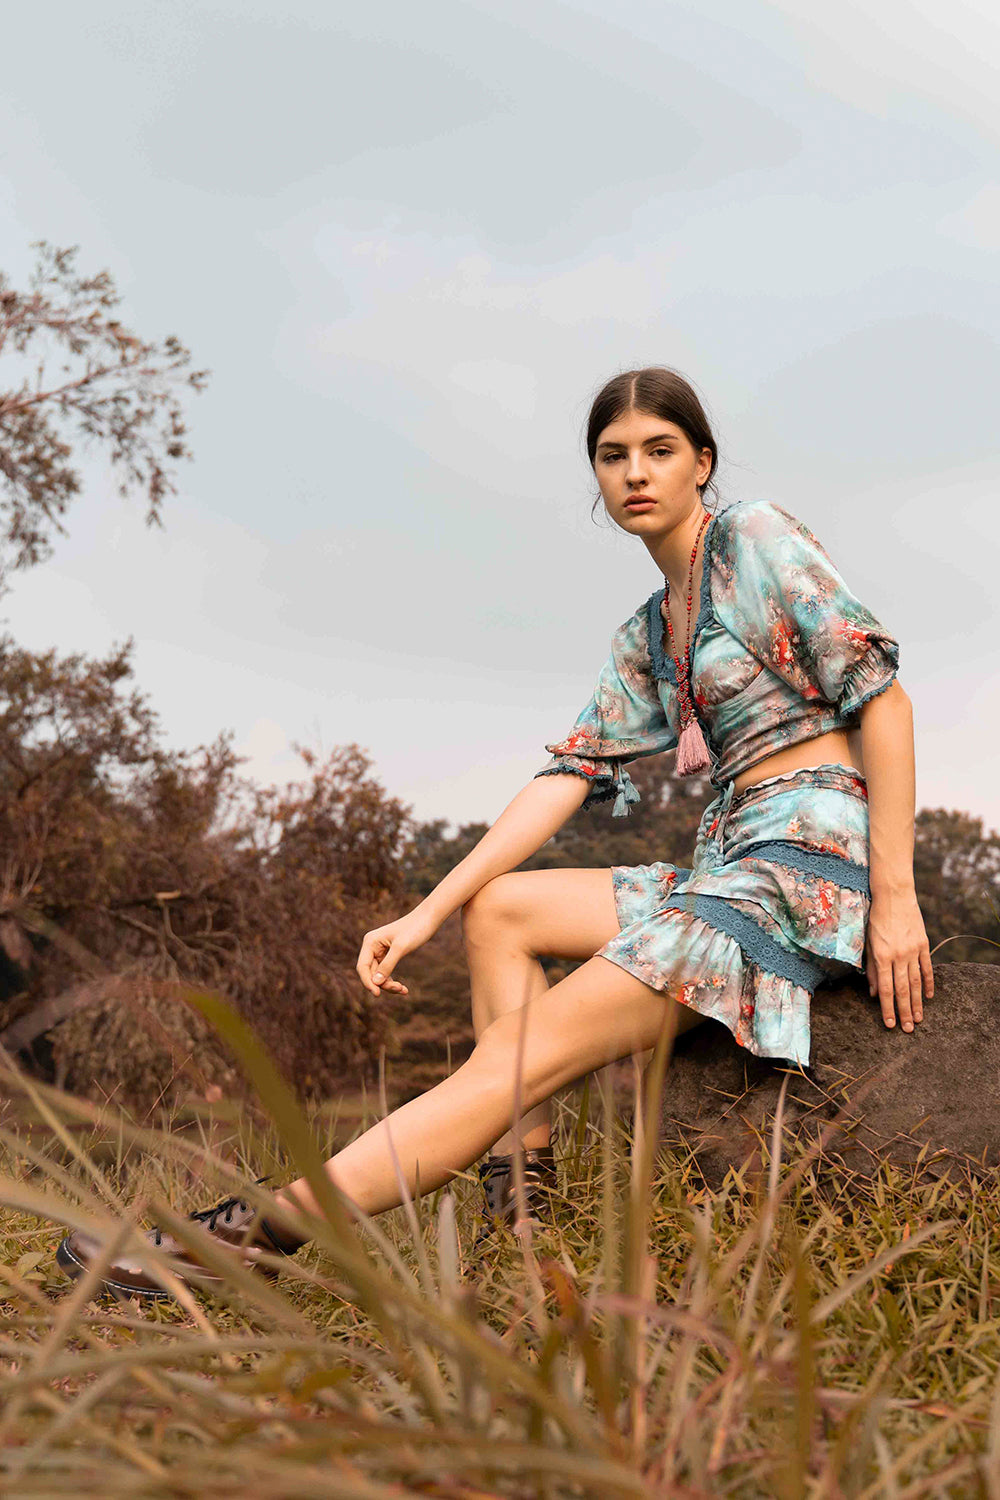 Rock your bohemian style guilt-free with the Aveline Mini Skirt, ethically sourced and handmade